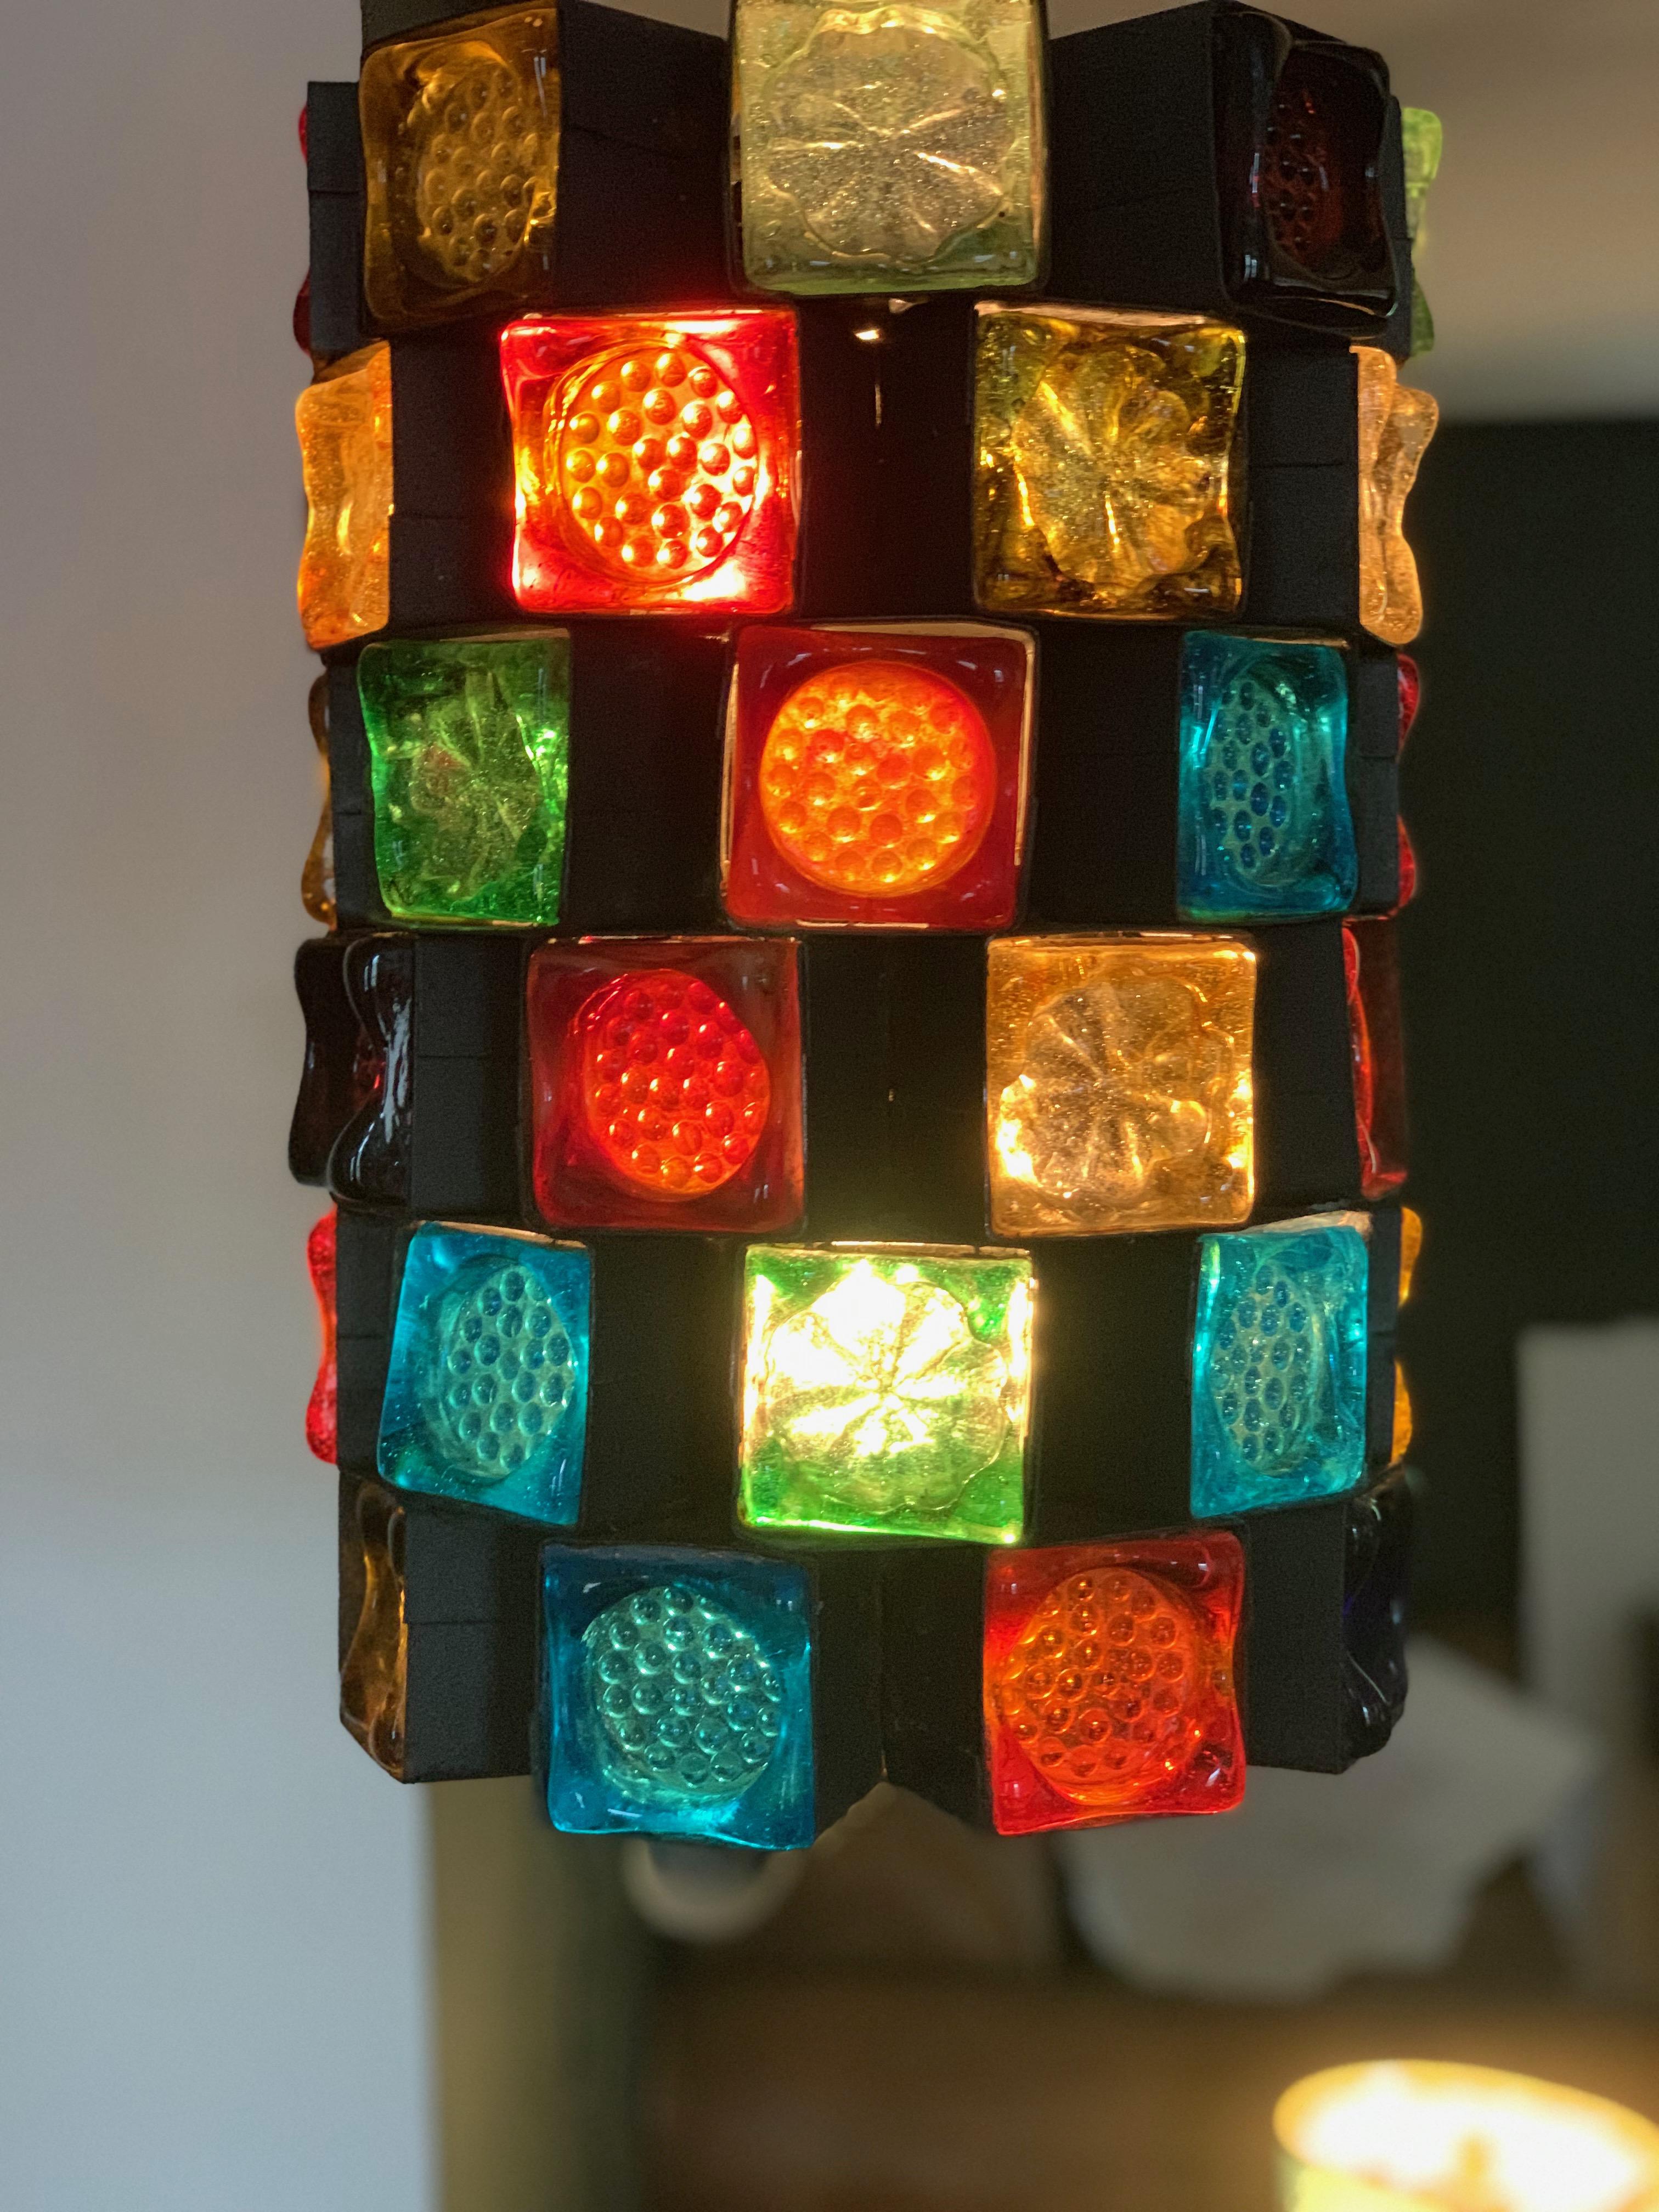 Midcentury Italian Brutalist early Poliarte Forged metal and stained glass pendant light fixture

Gorgeous piece from early in the career of Poli-Arte, hand blown Murano stained glass cubes with uniquely patterned surfaces, each in its own forged